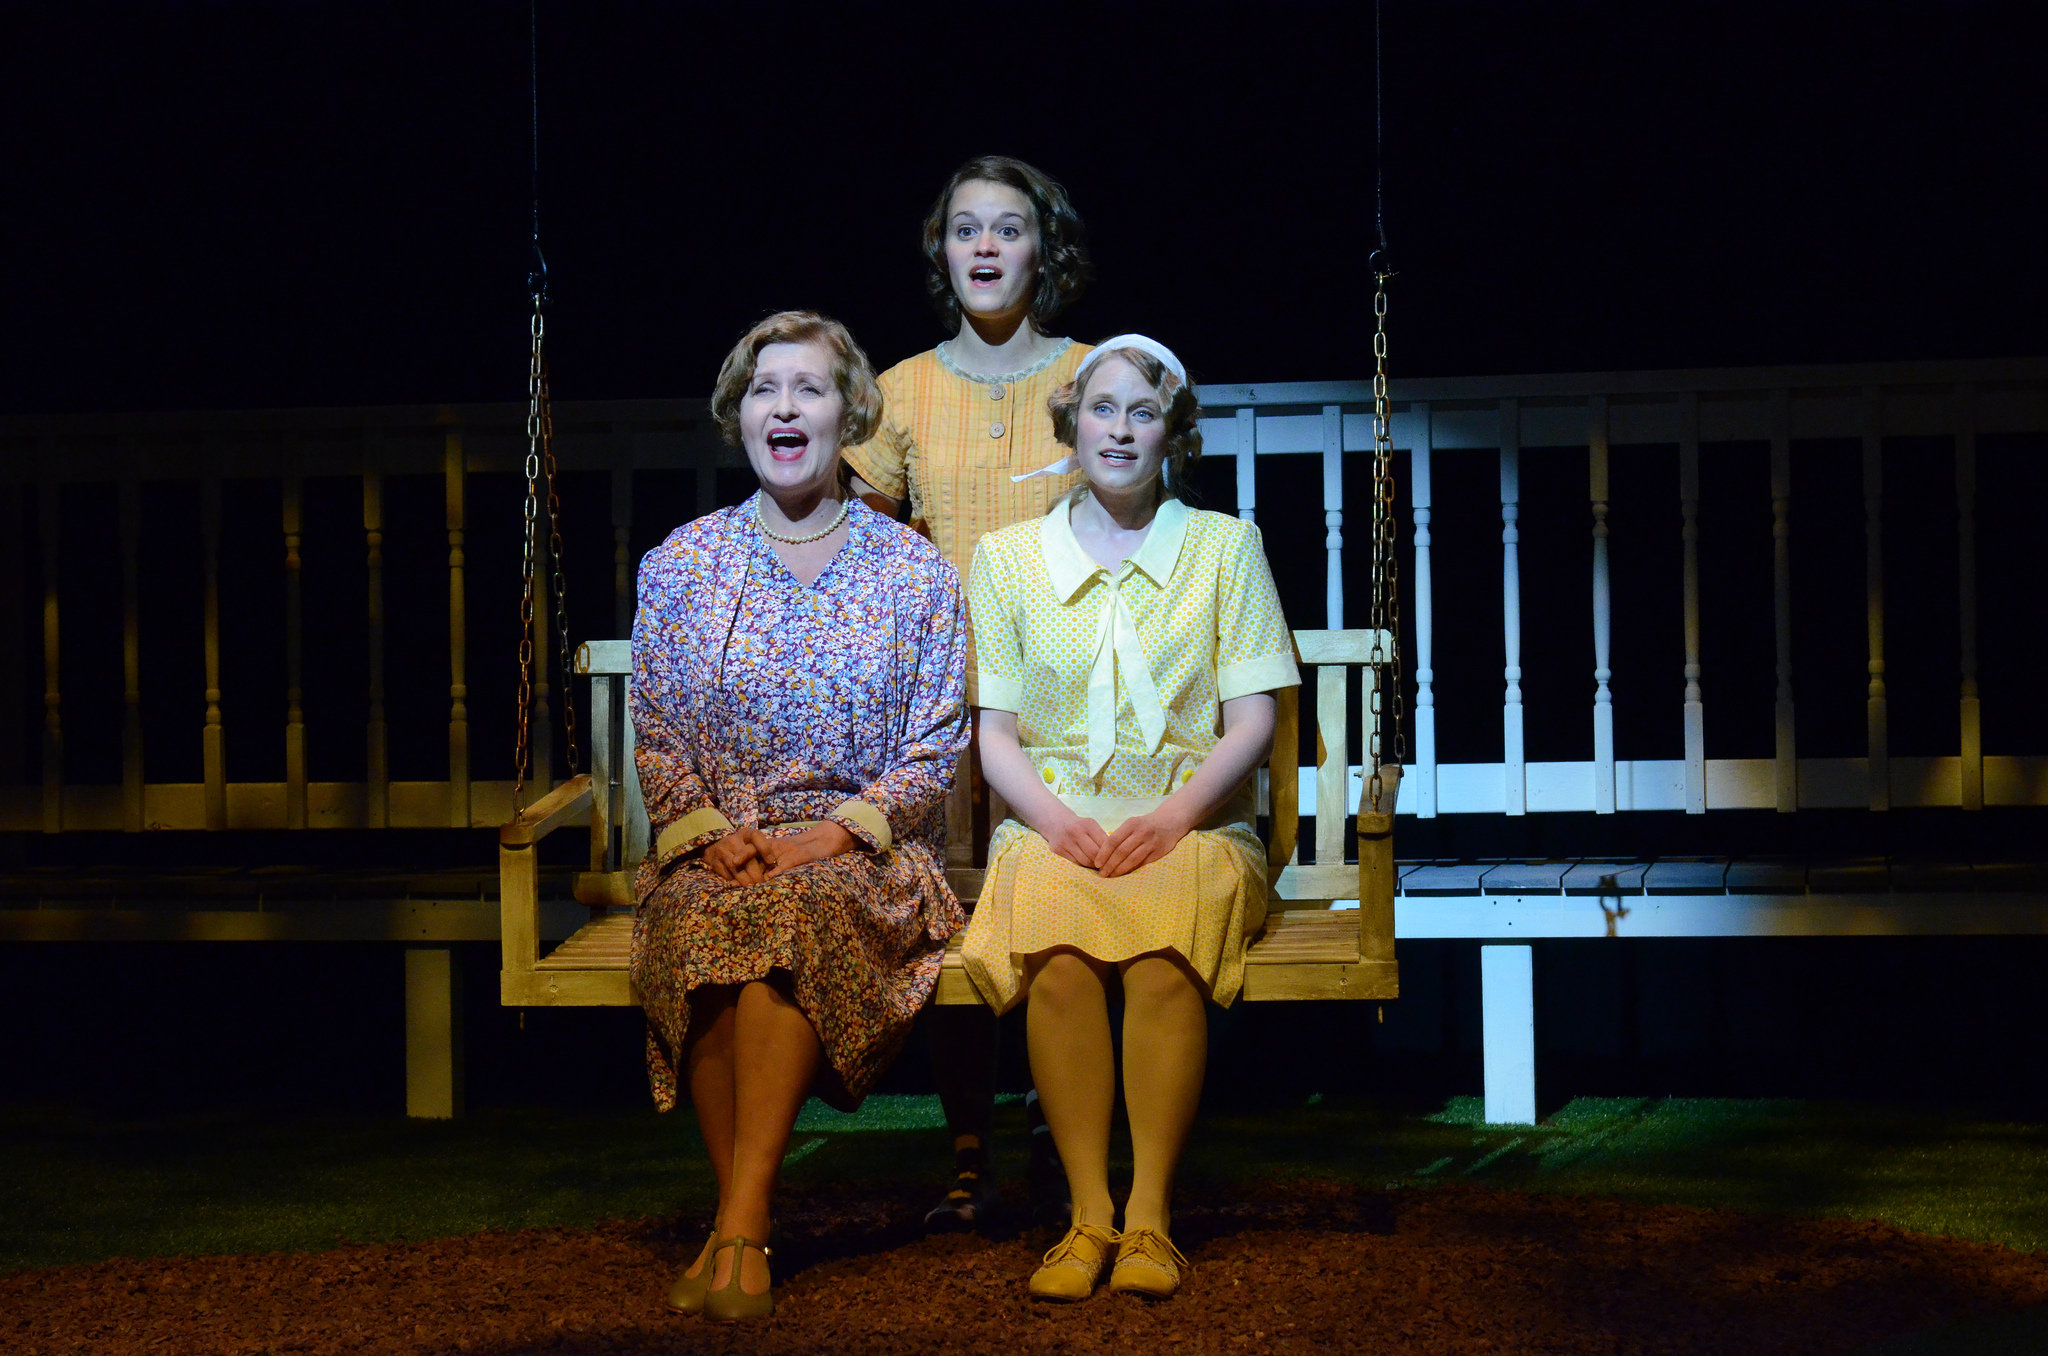 As Aunt Gert in A YOUNG LADY OF PROPERTY by Horton Foote at REP STAGE with Kathryn Zoerb and Christine Demuth